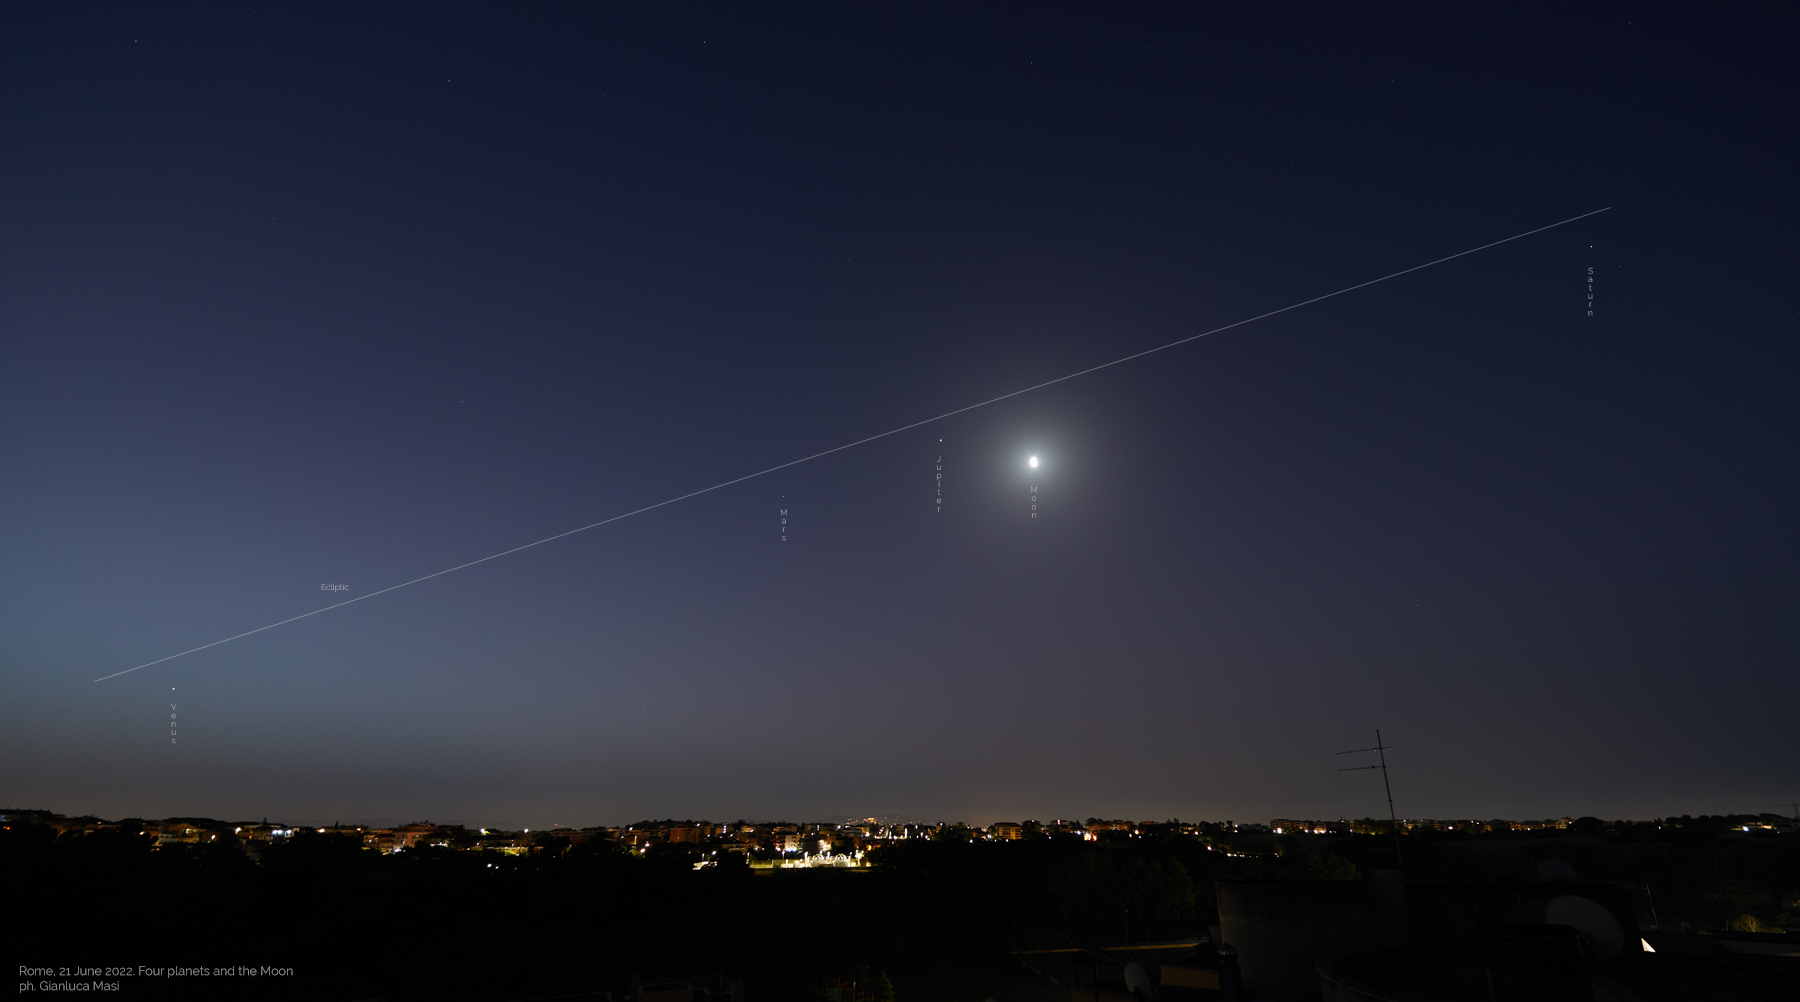 Venus, Mars, Jupiter and Saturn plus the Moon were showing in a very hazy sky. Mercury not visible. 21 June 2022.